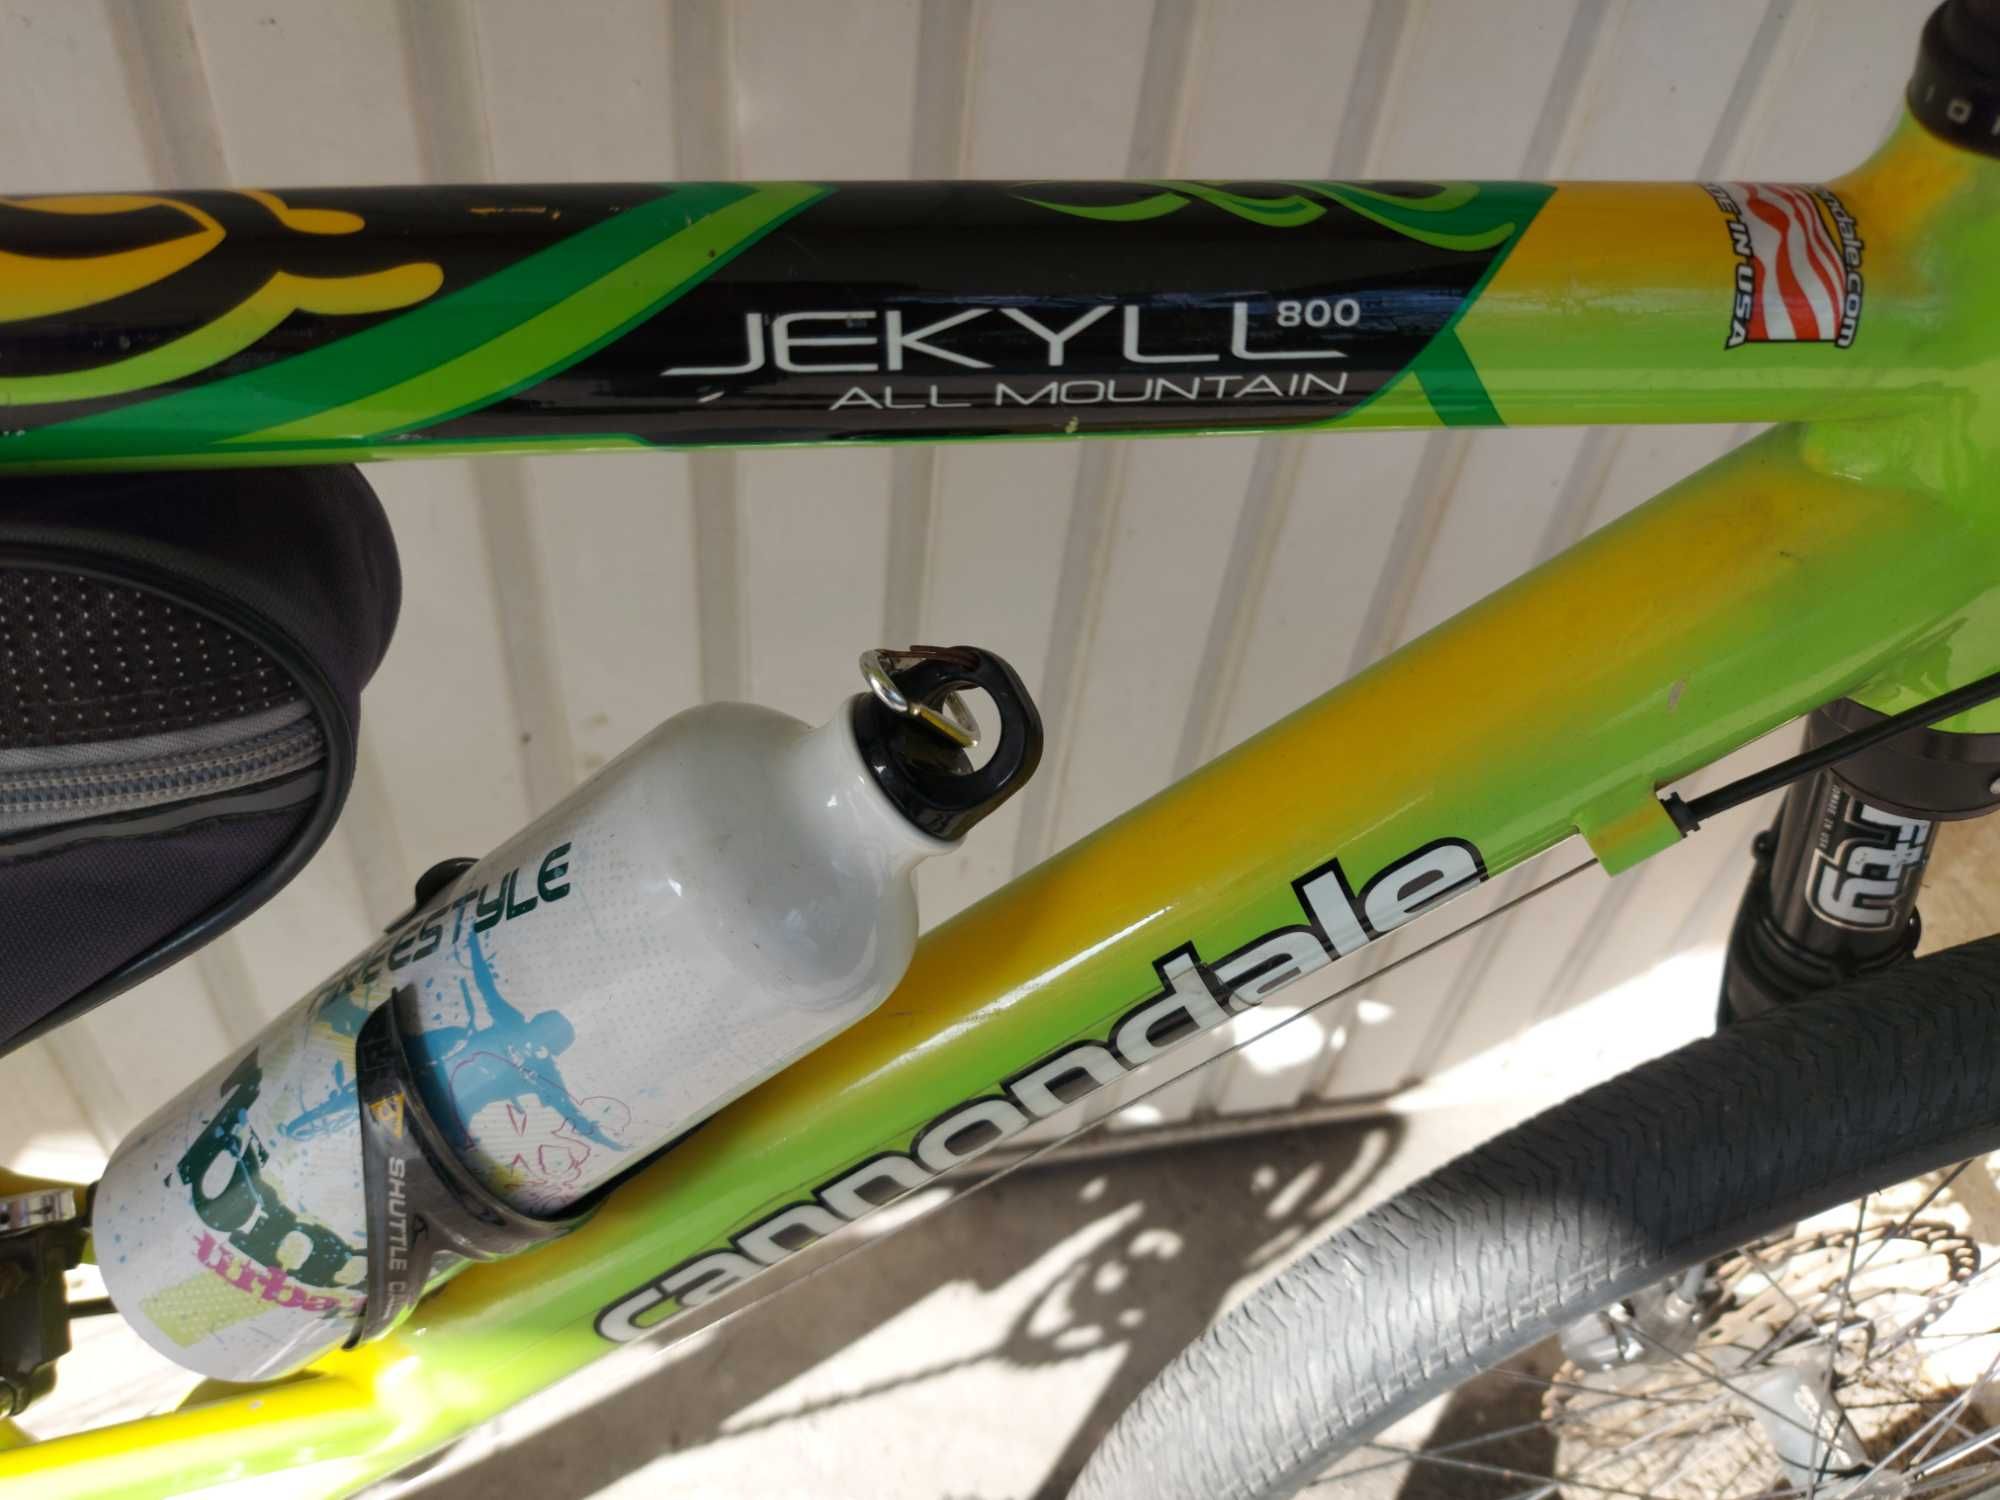 Велосипед Cannondale Jekill 800 all mountain